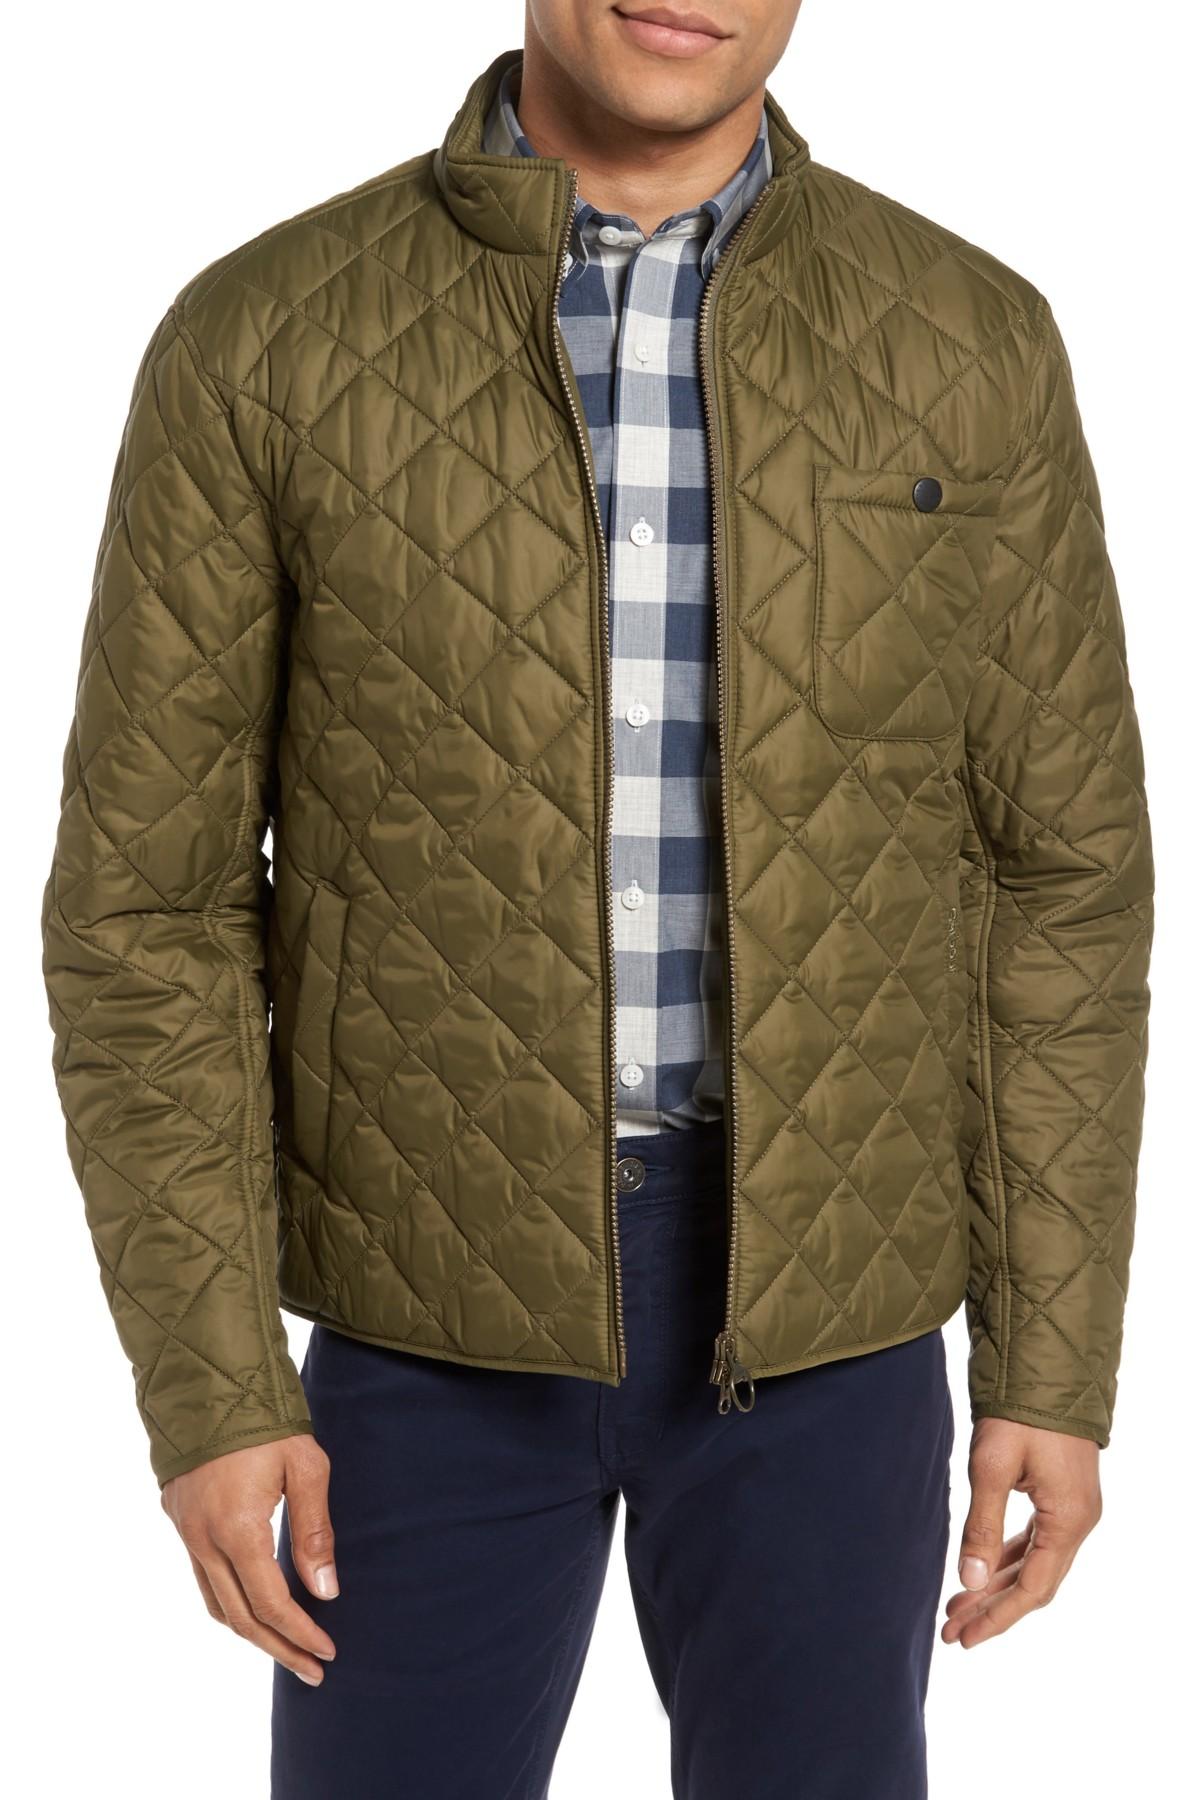 Barbour Pod Slim Fit Quilted Jacket in Green for Men - Lyst